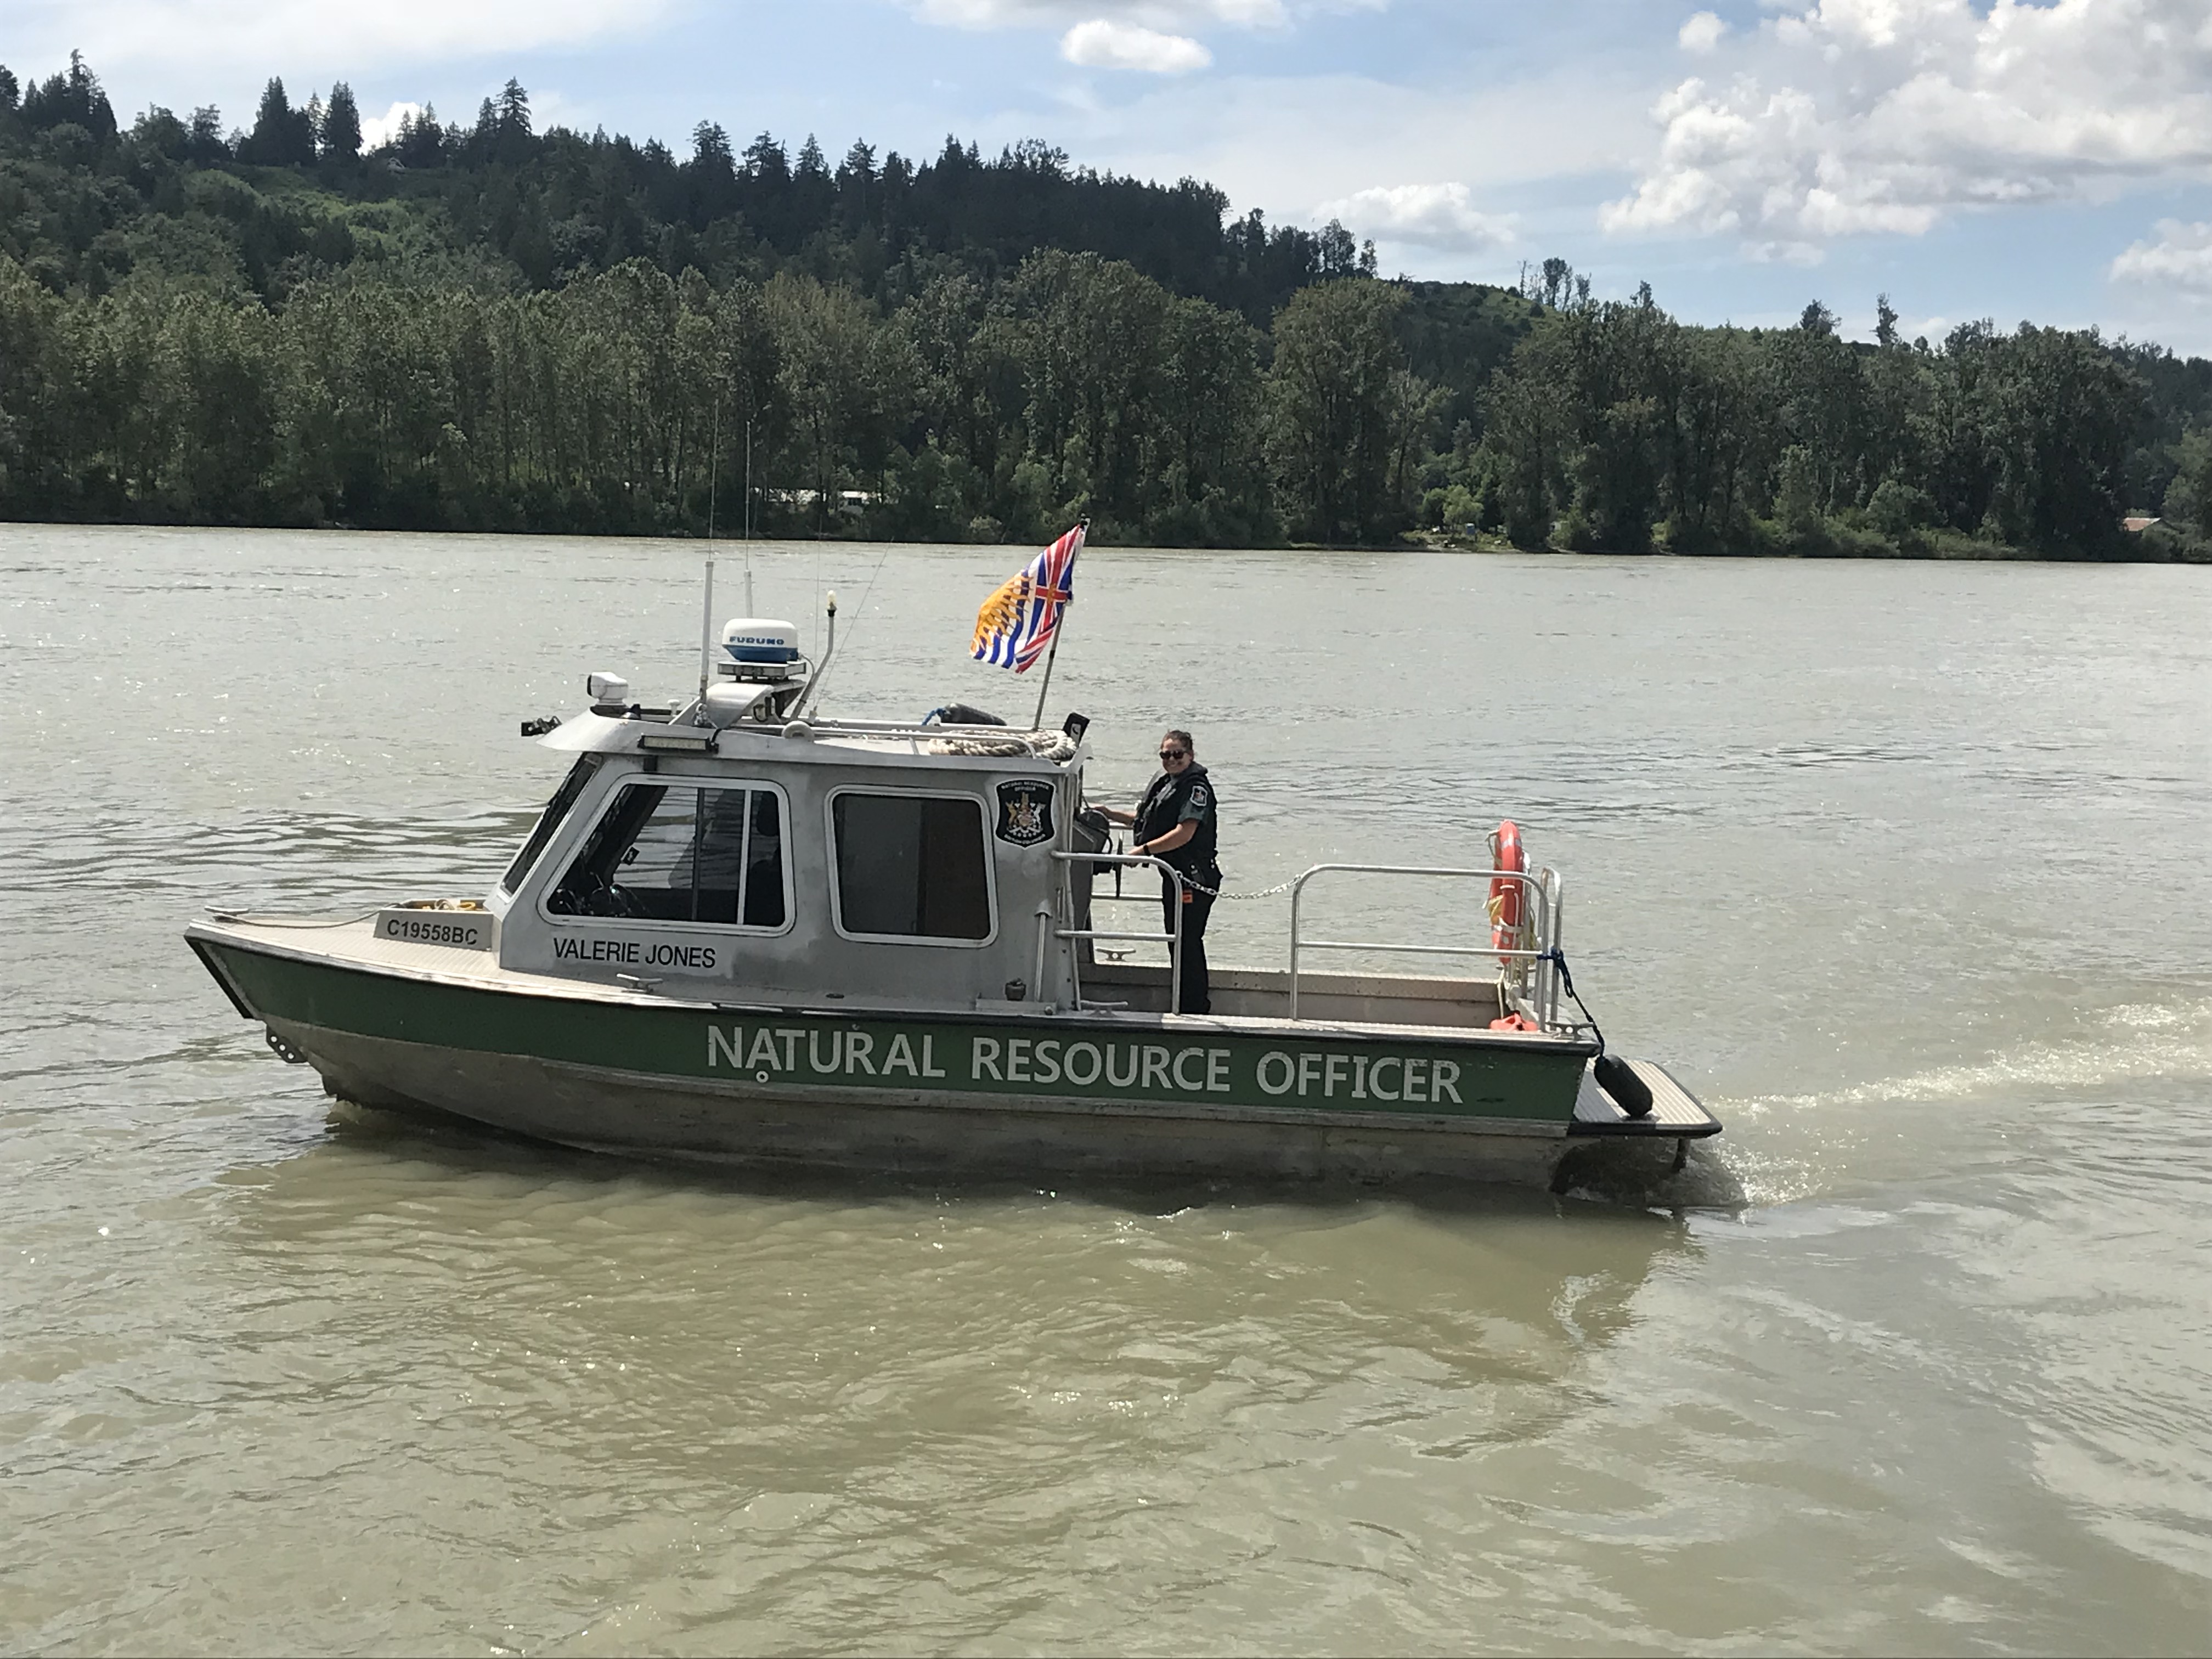 A NRO conducts an inspection that requires boat only access